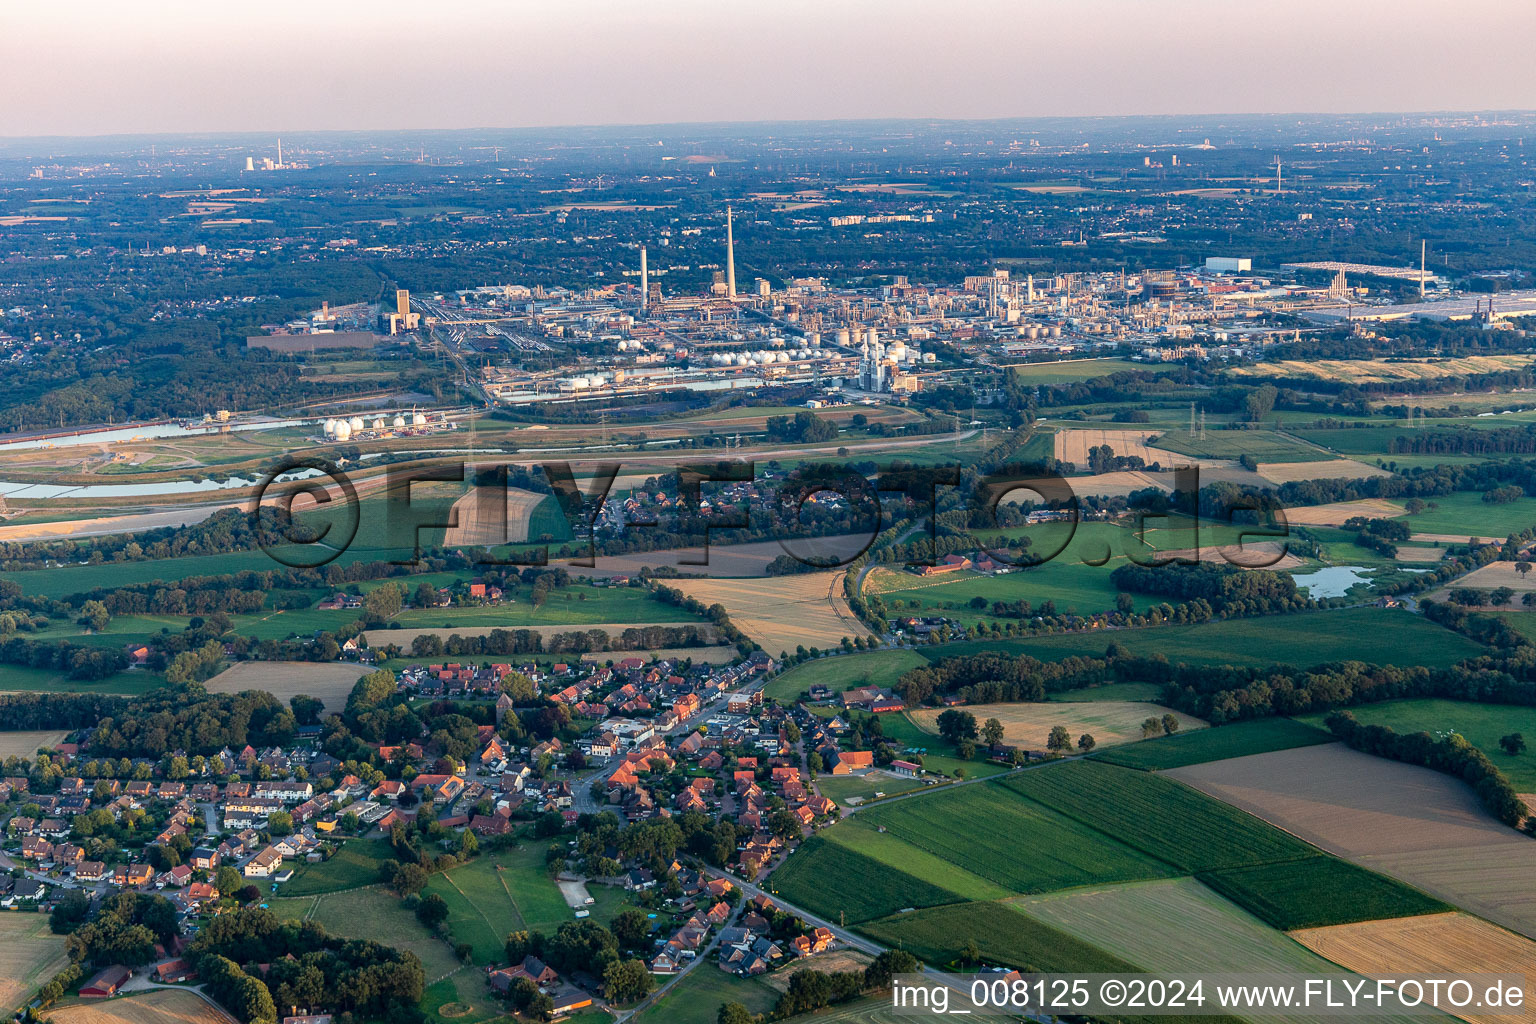 Village view on the edge of agricultural fields and land in Lippramsdorf in the state North Rhine-Westphalia, Germany